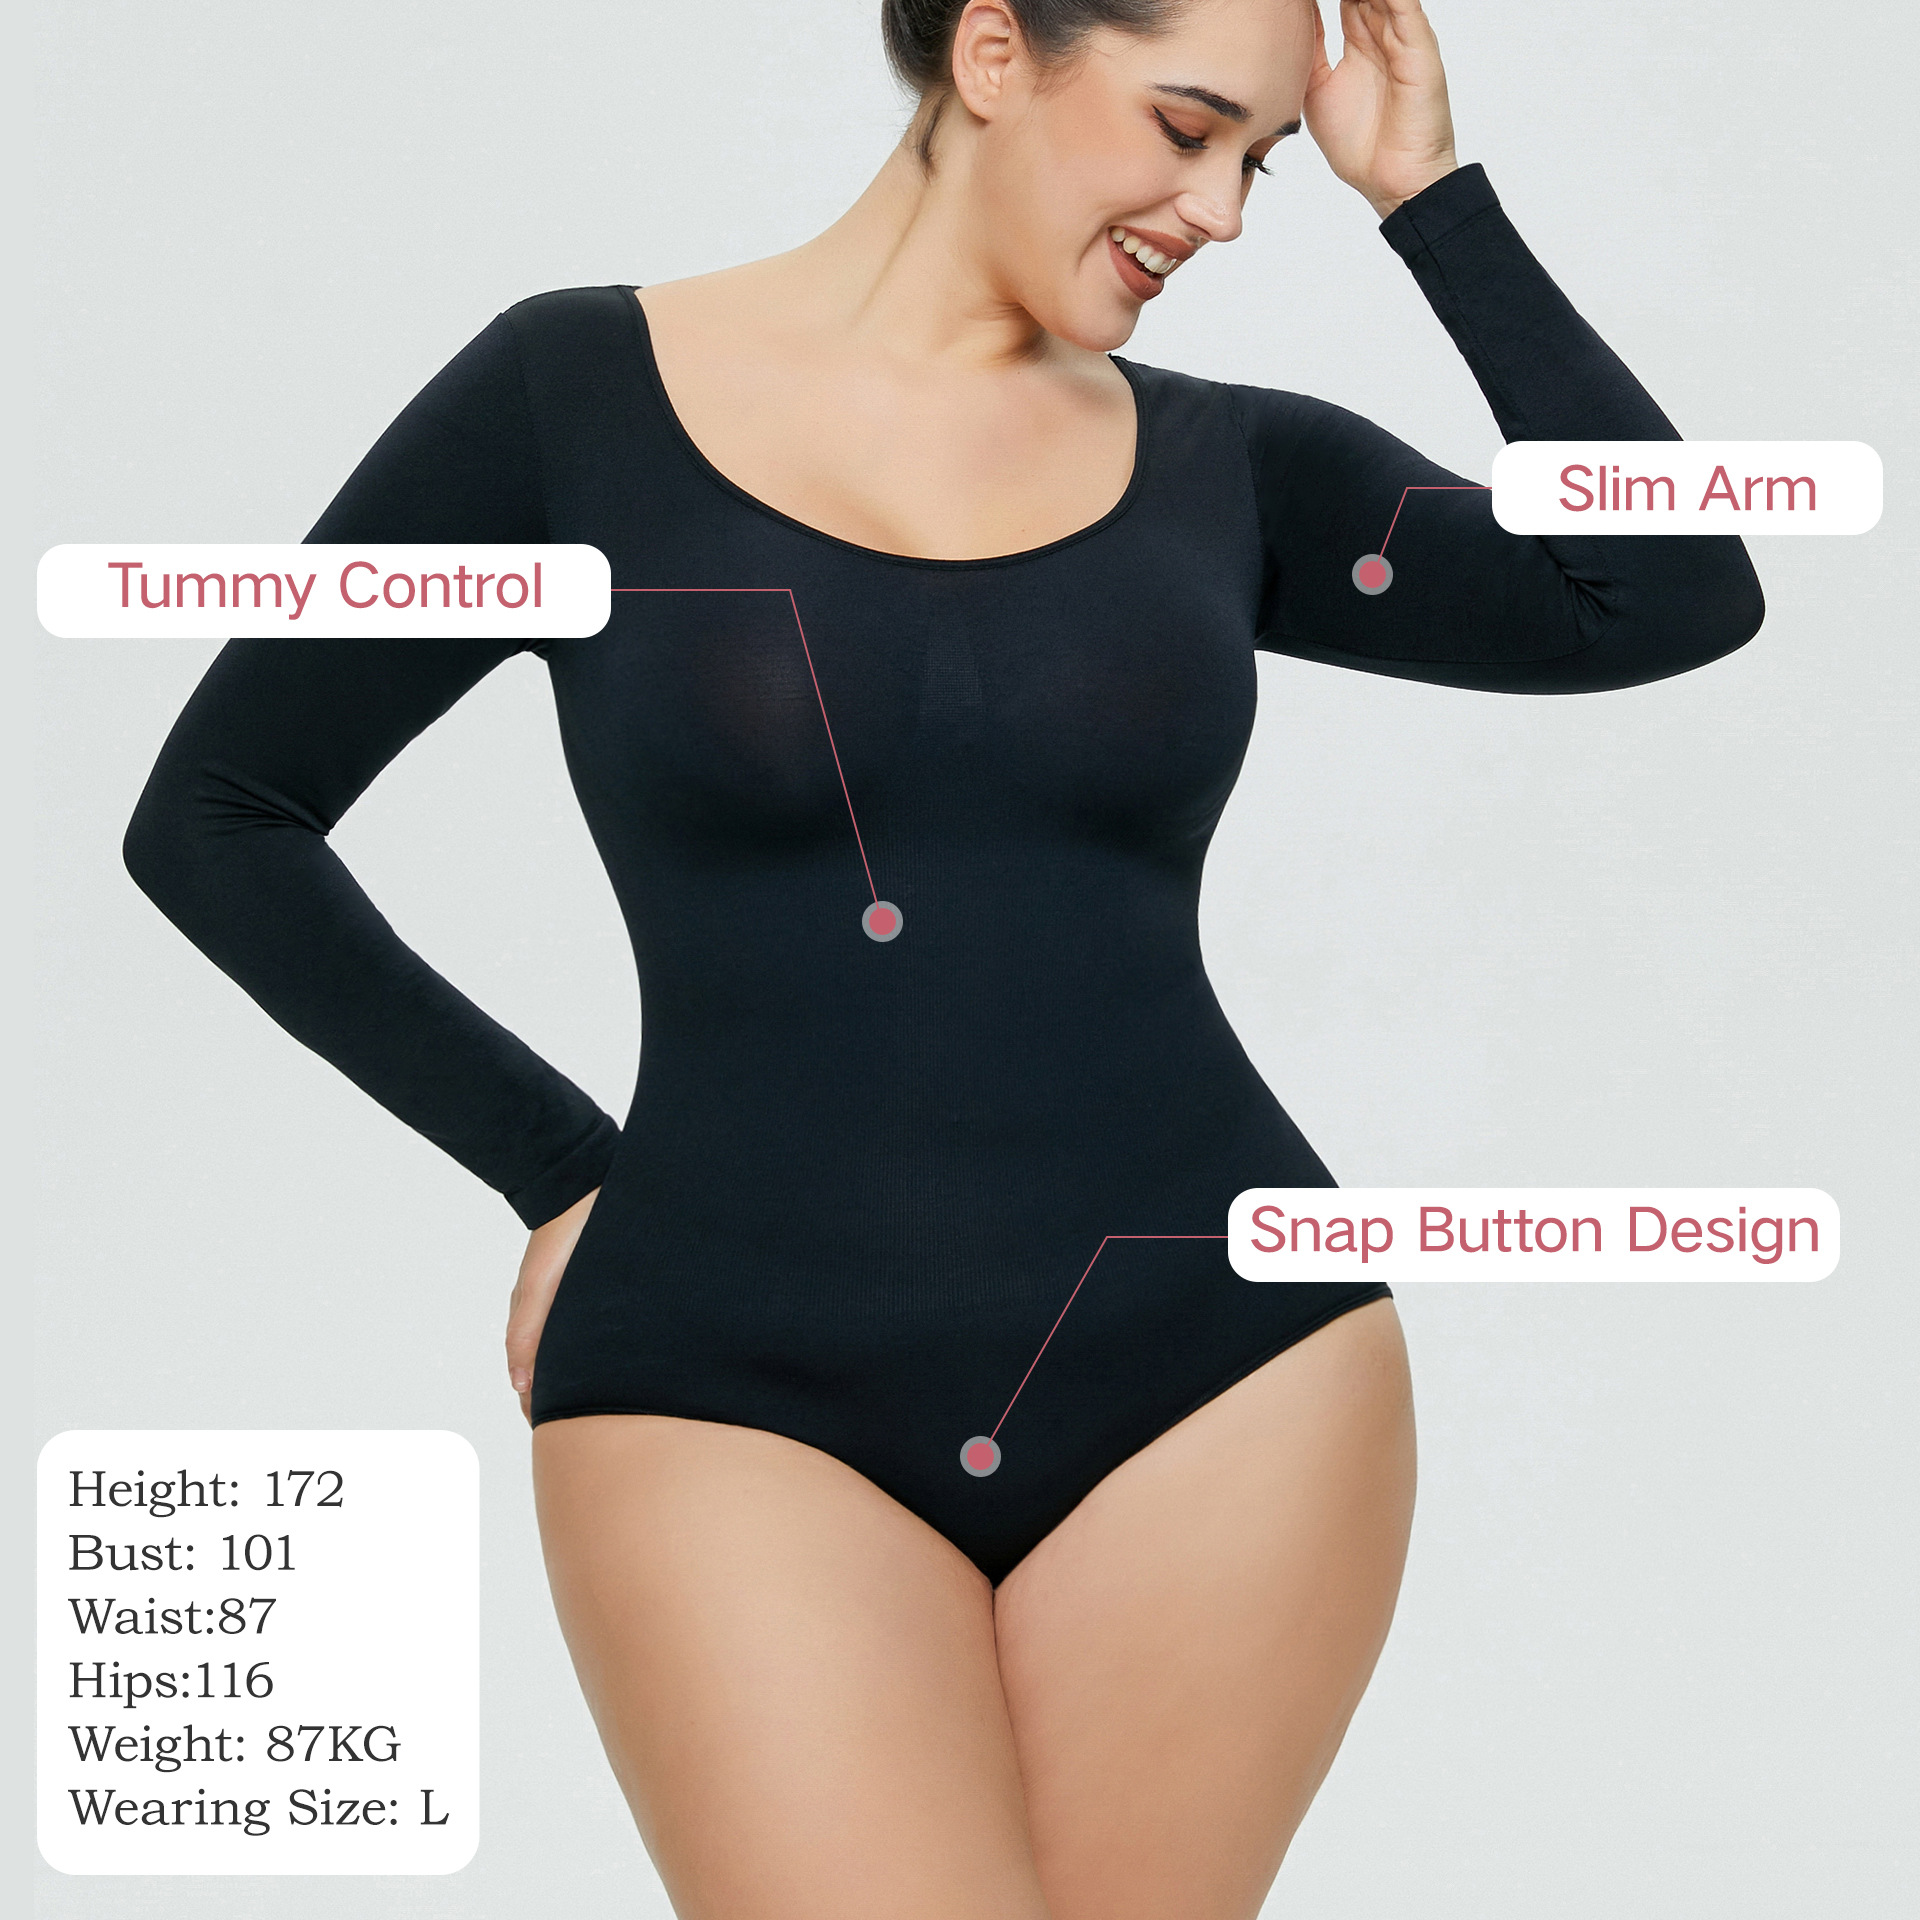 Shapewear 101: What To Wear Under Your Dress